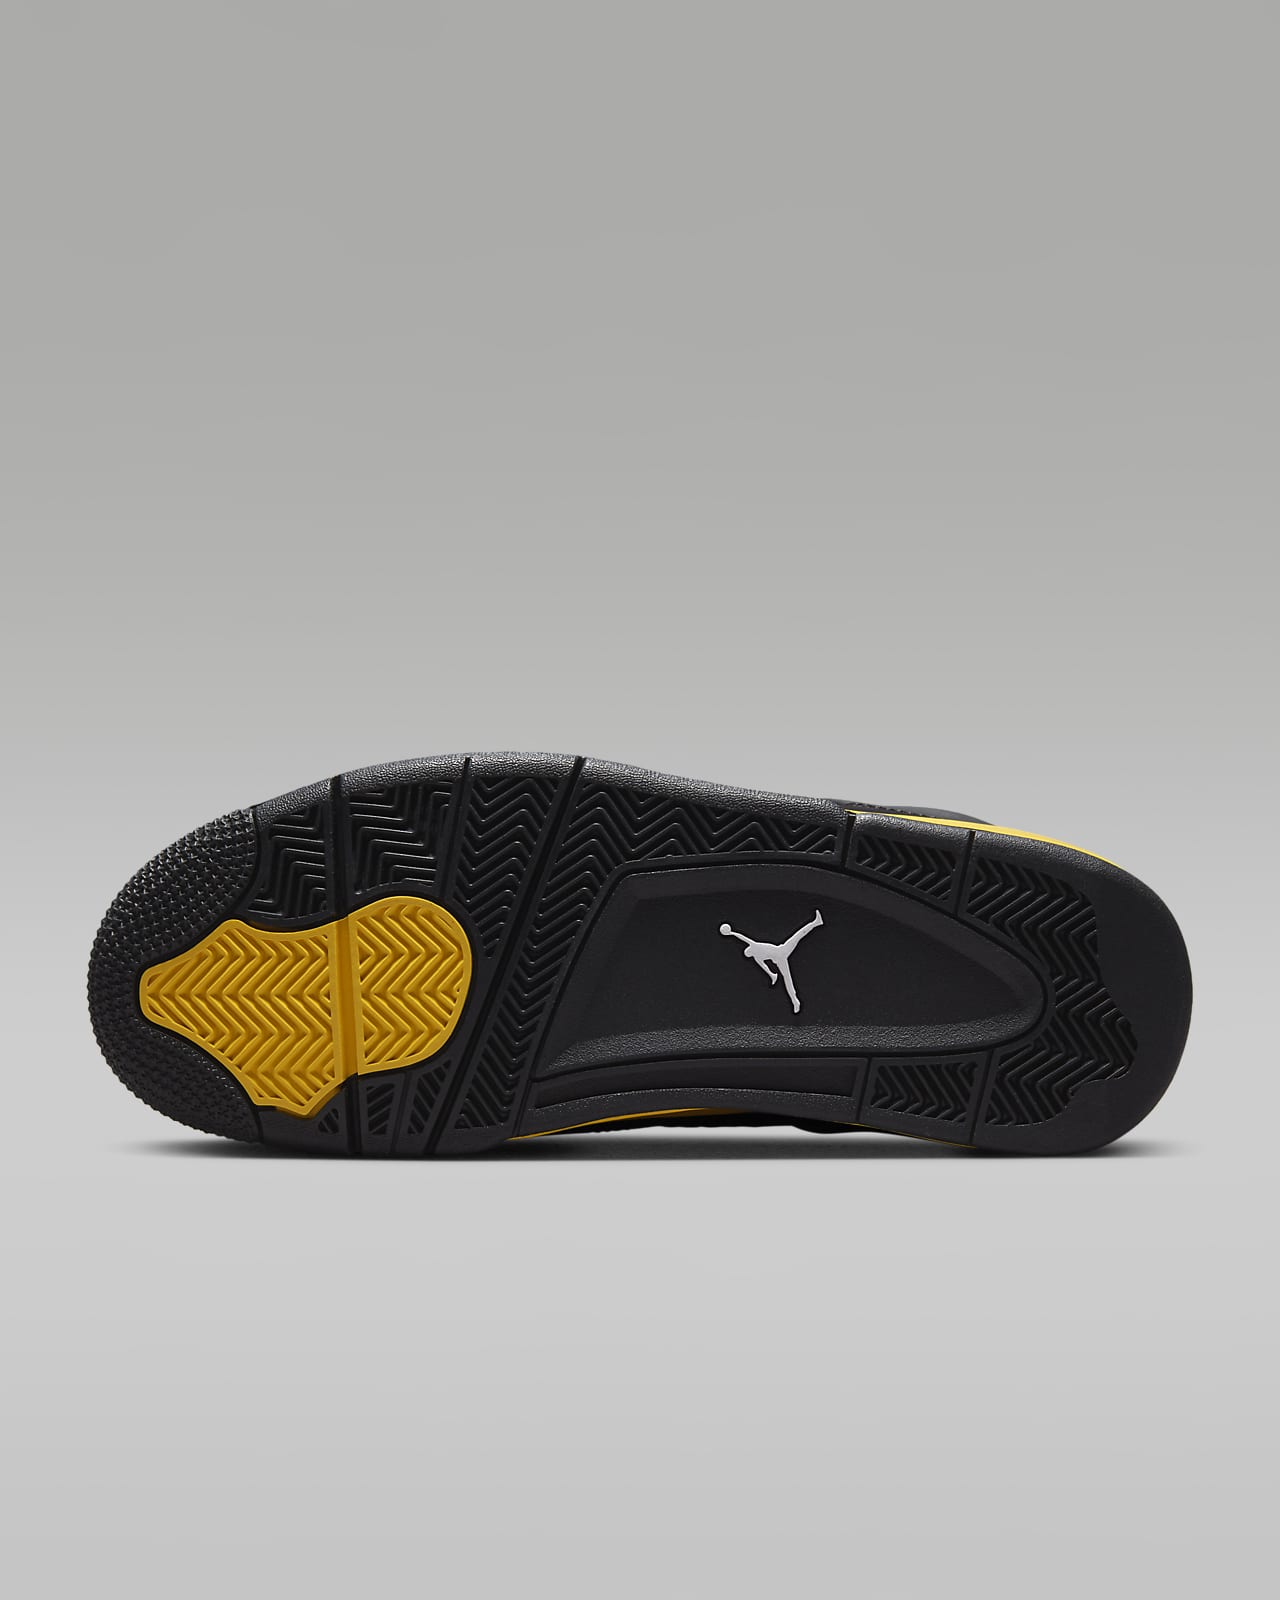 4 Iconic Black and Yellow Nike Sneakers